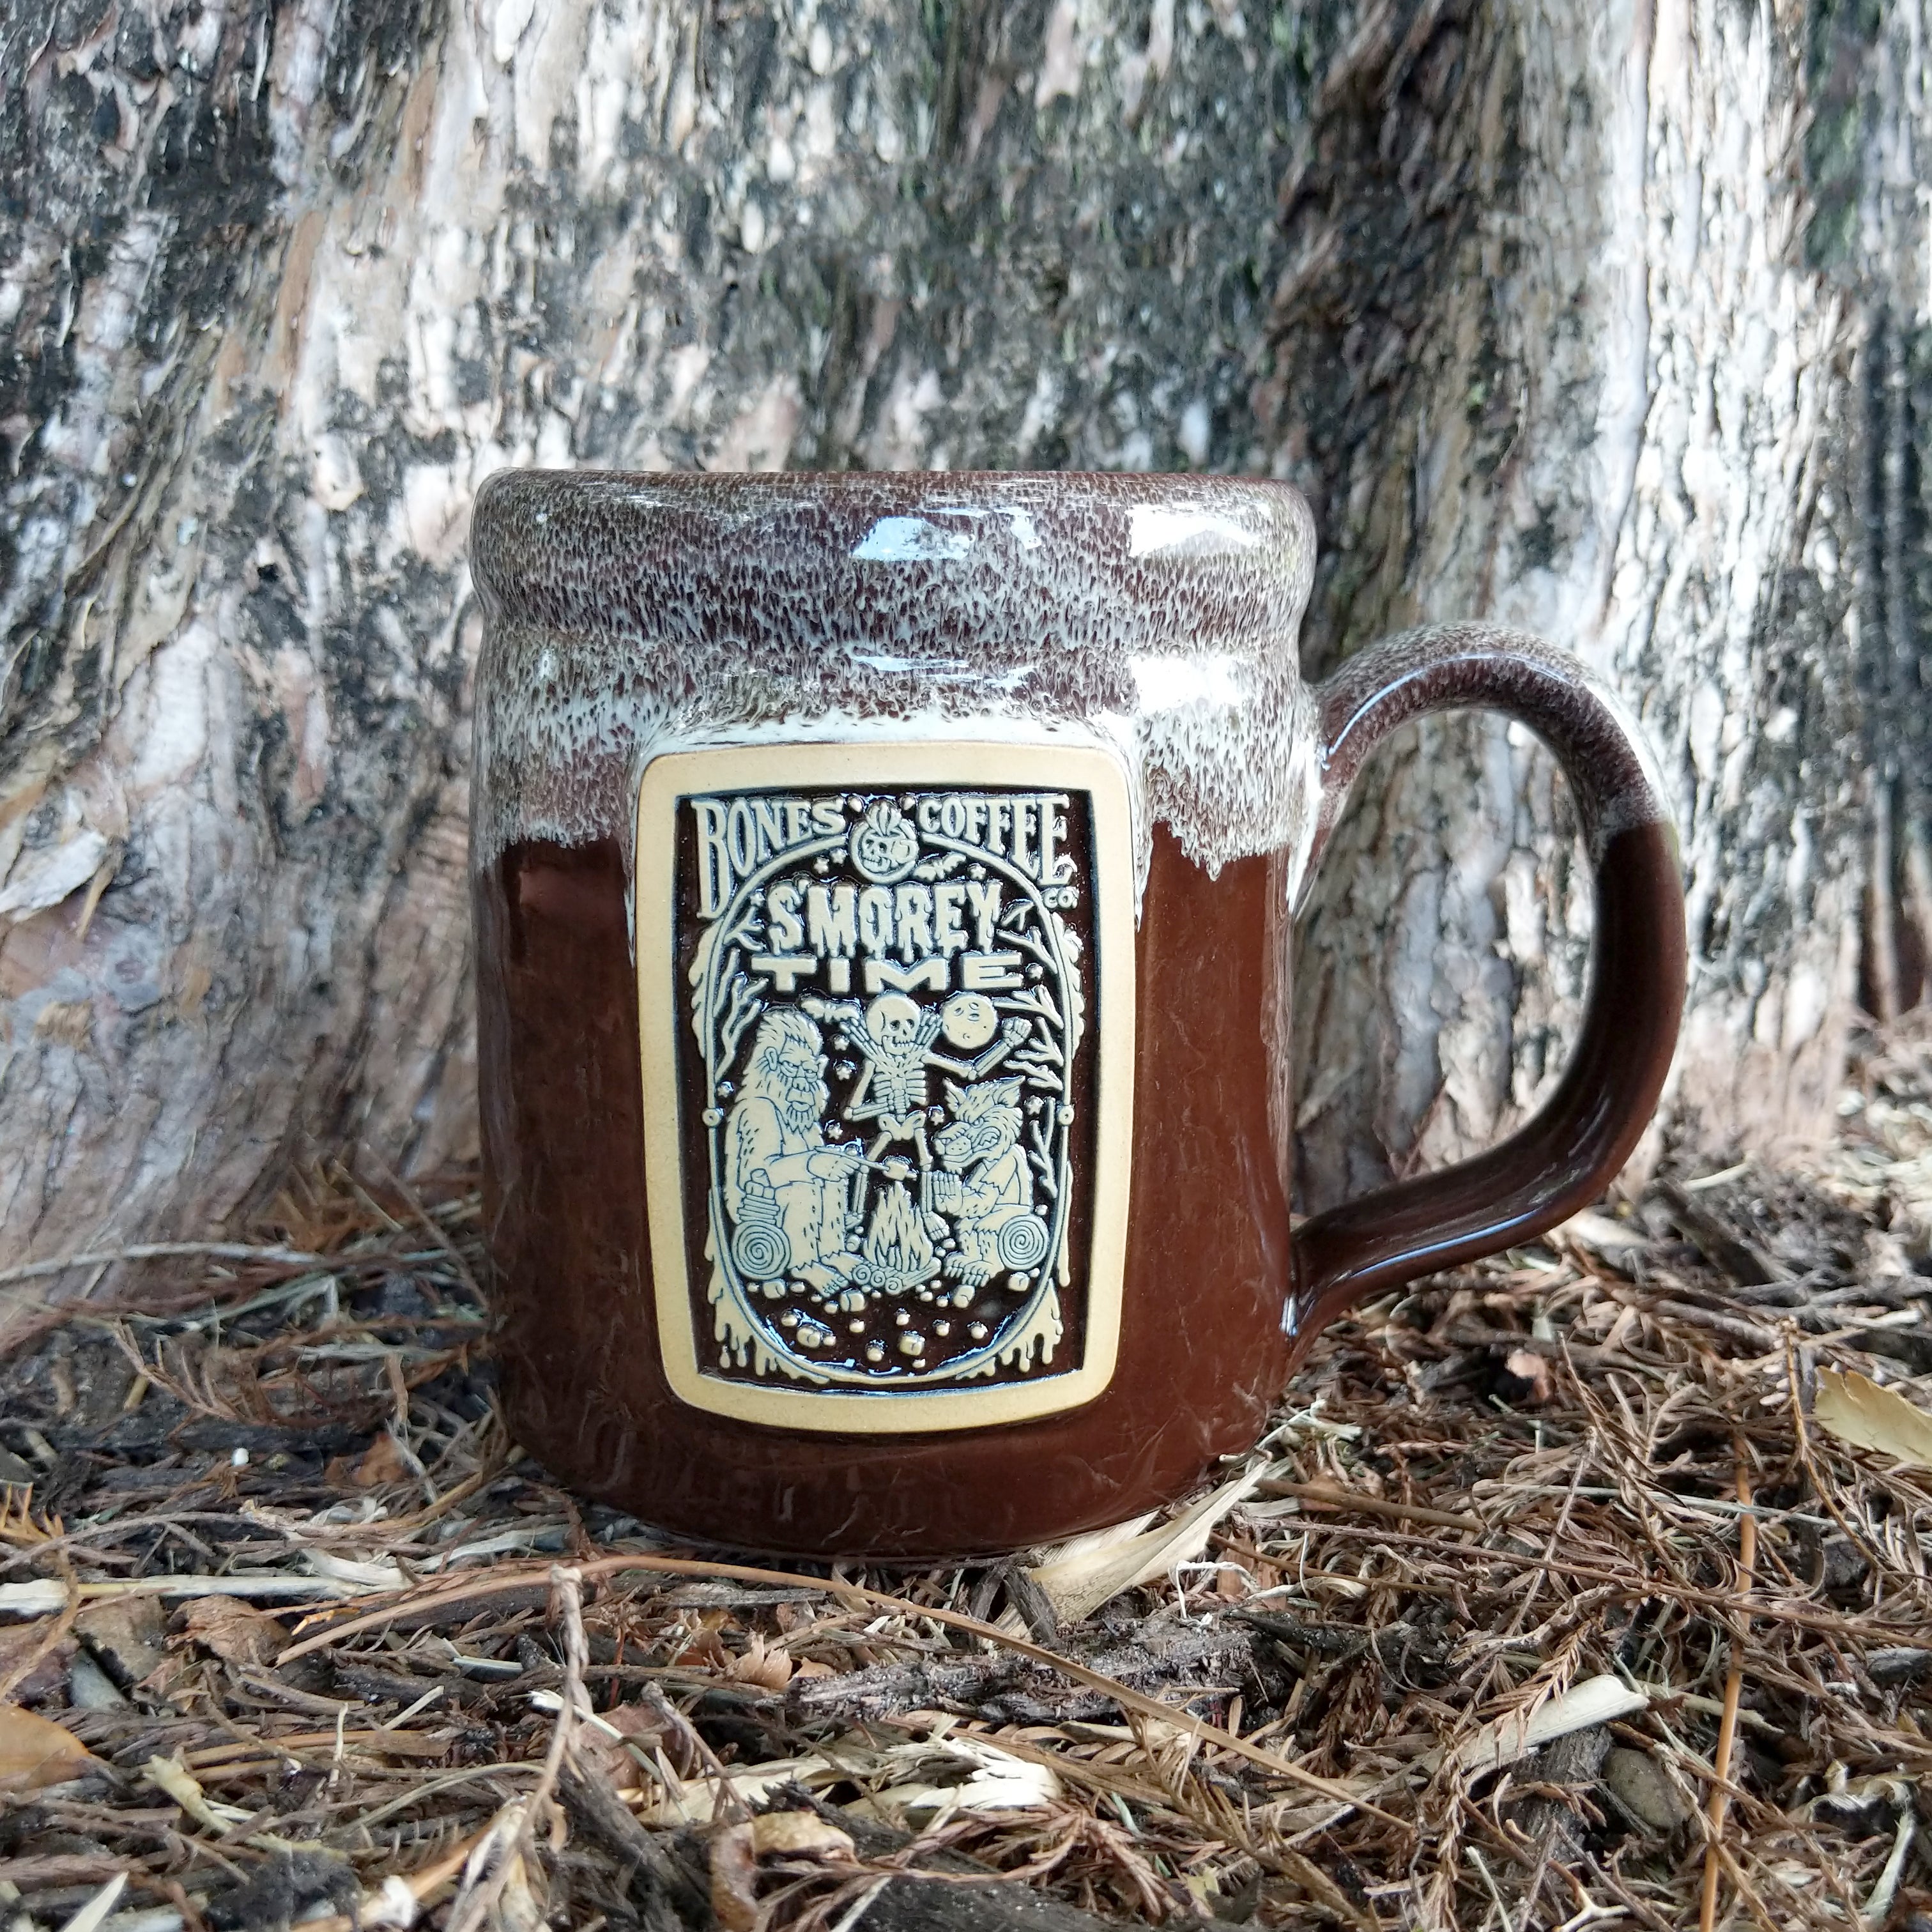 The front of the Bones Coffee Company S’morey Time hand thrown mug with the S’morey Time coffee art on the golden medallion. The mug is chocolate colored and has a white glaze on top of it.